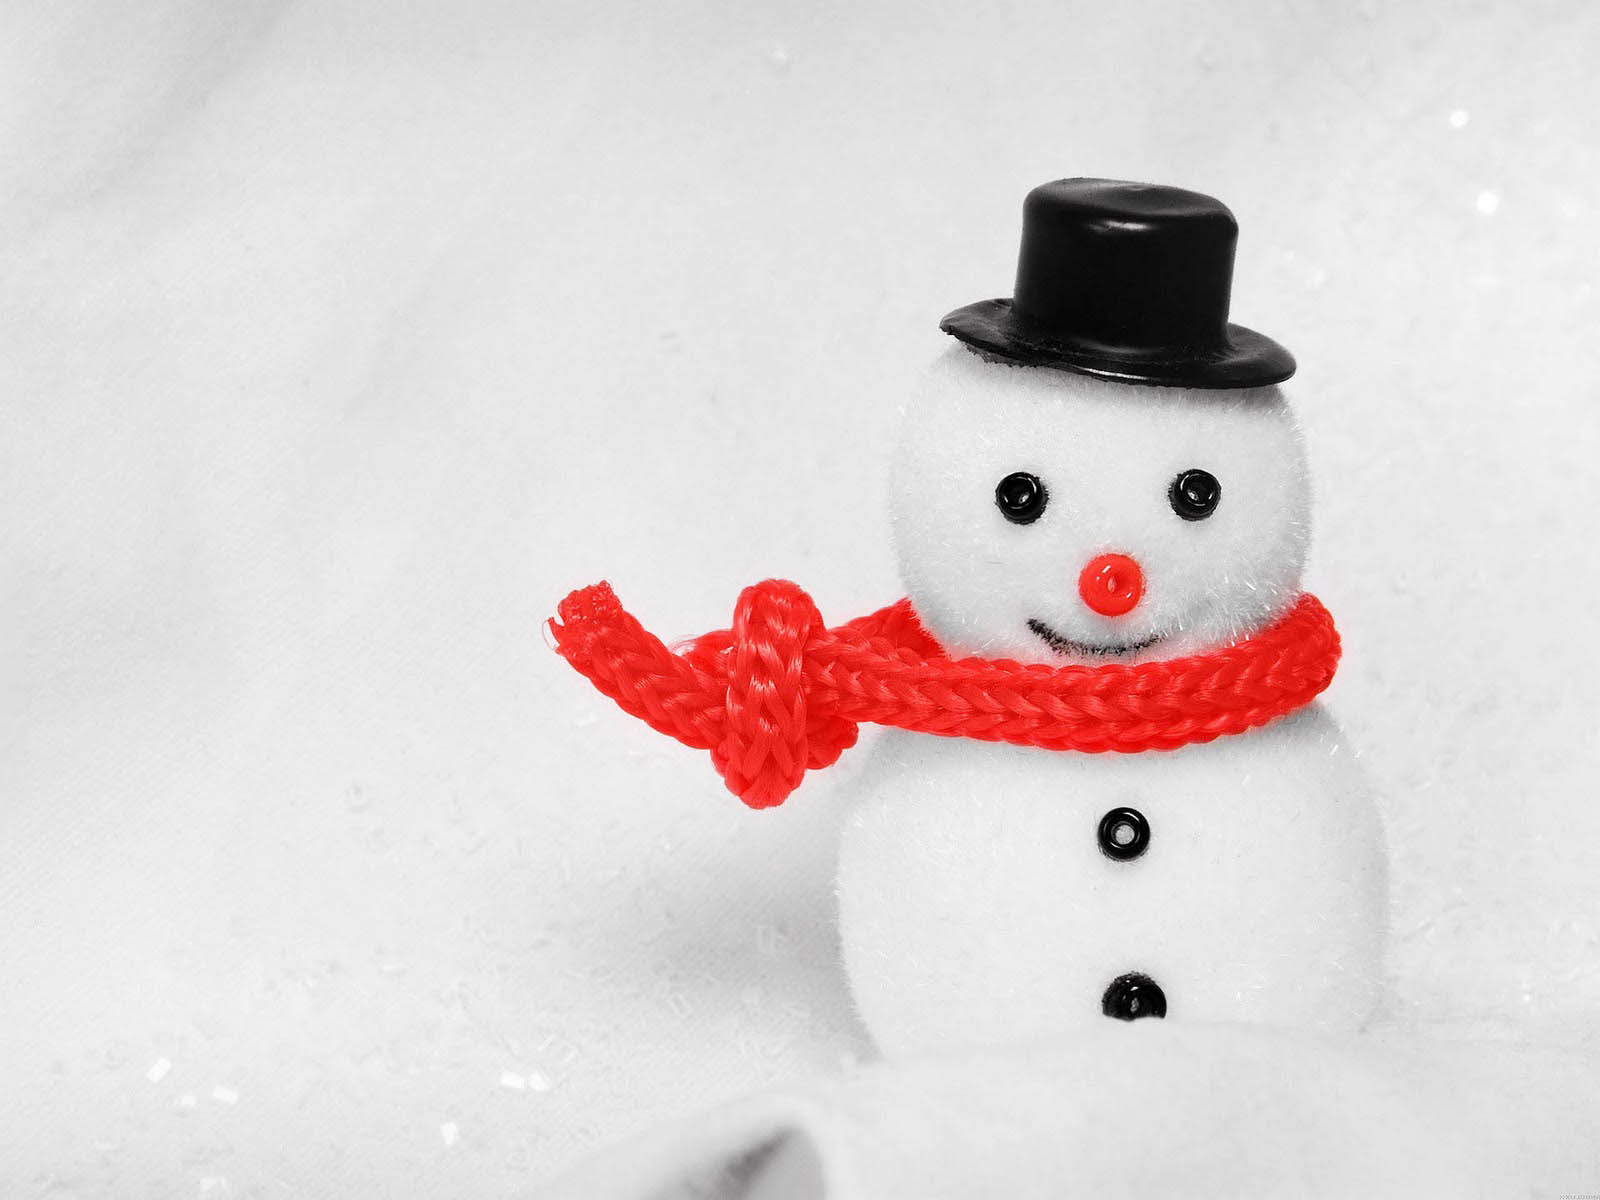 Tag Snowman Wallpaper Background Paos Pictures And Image For